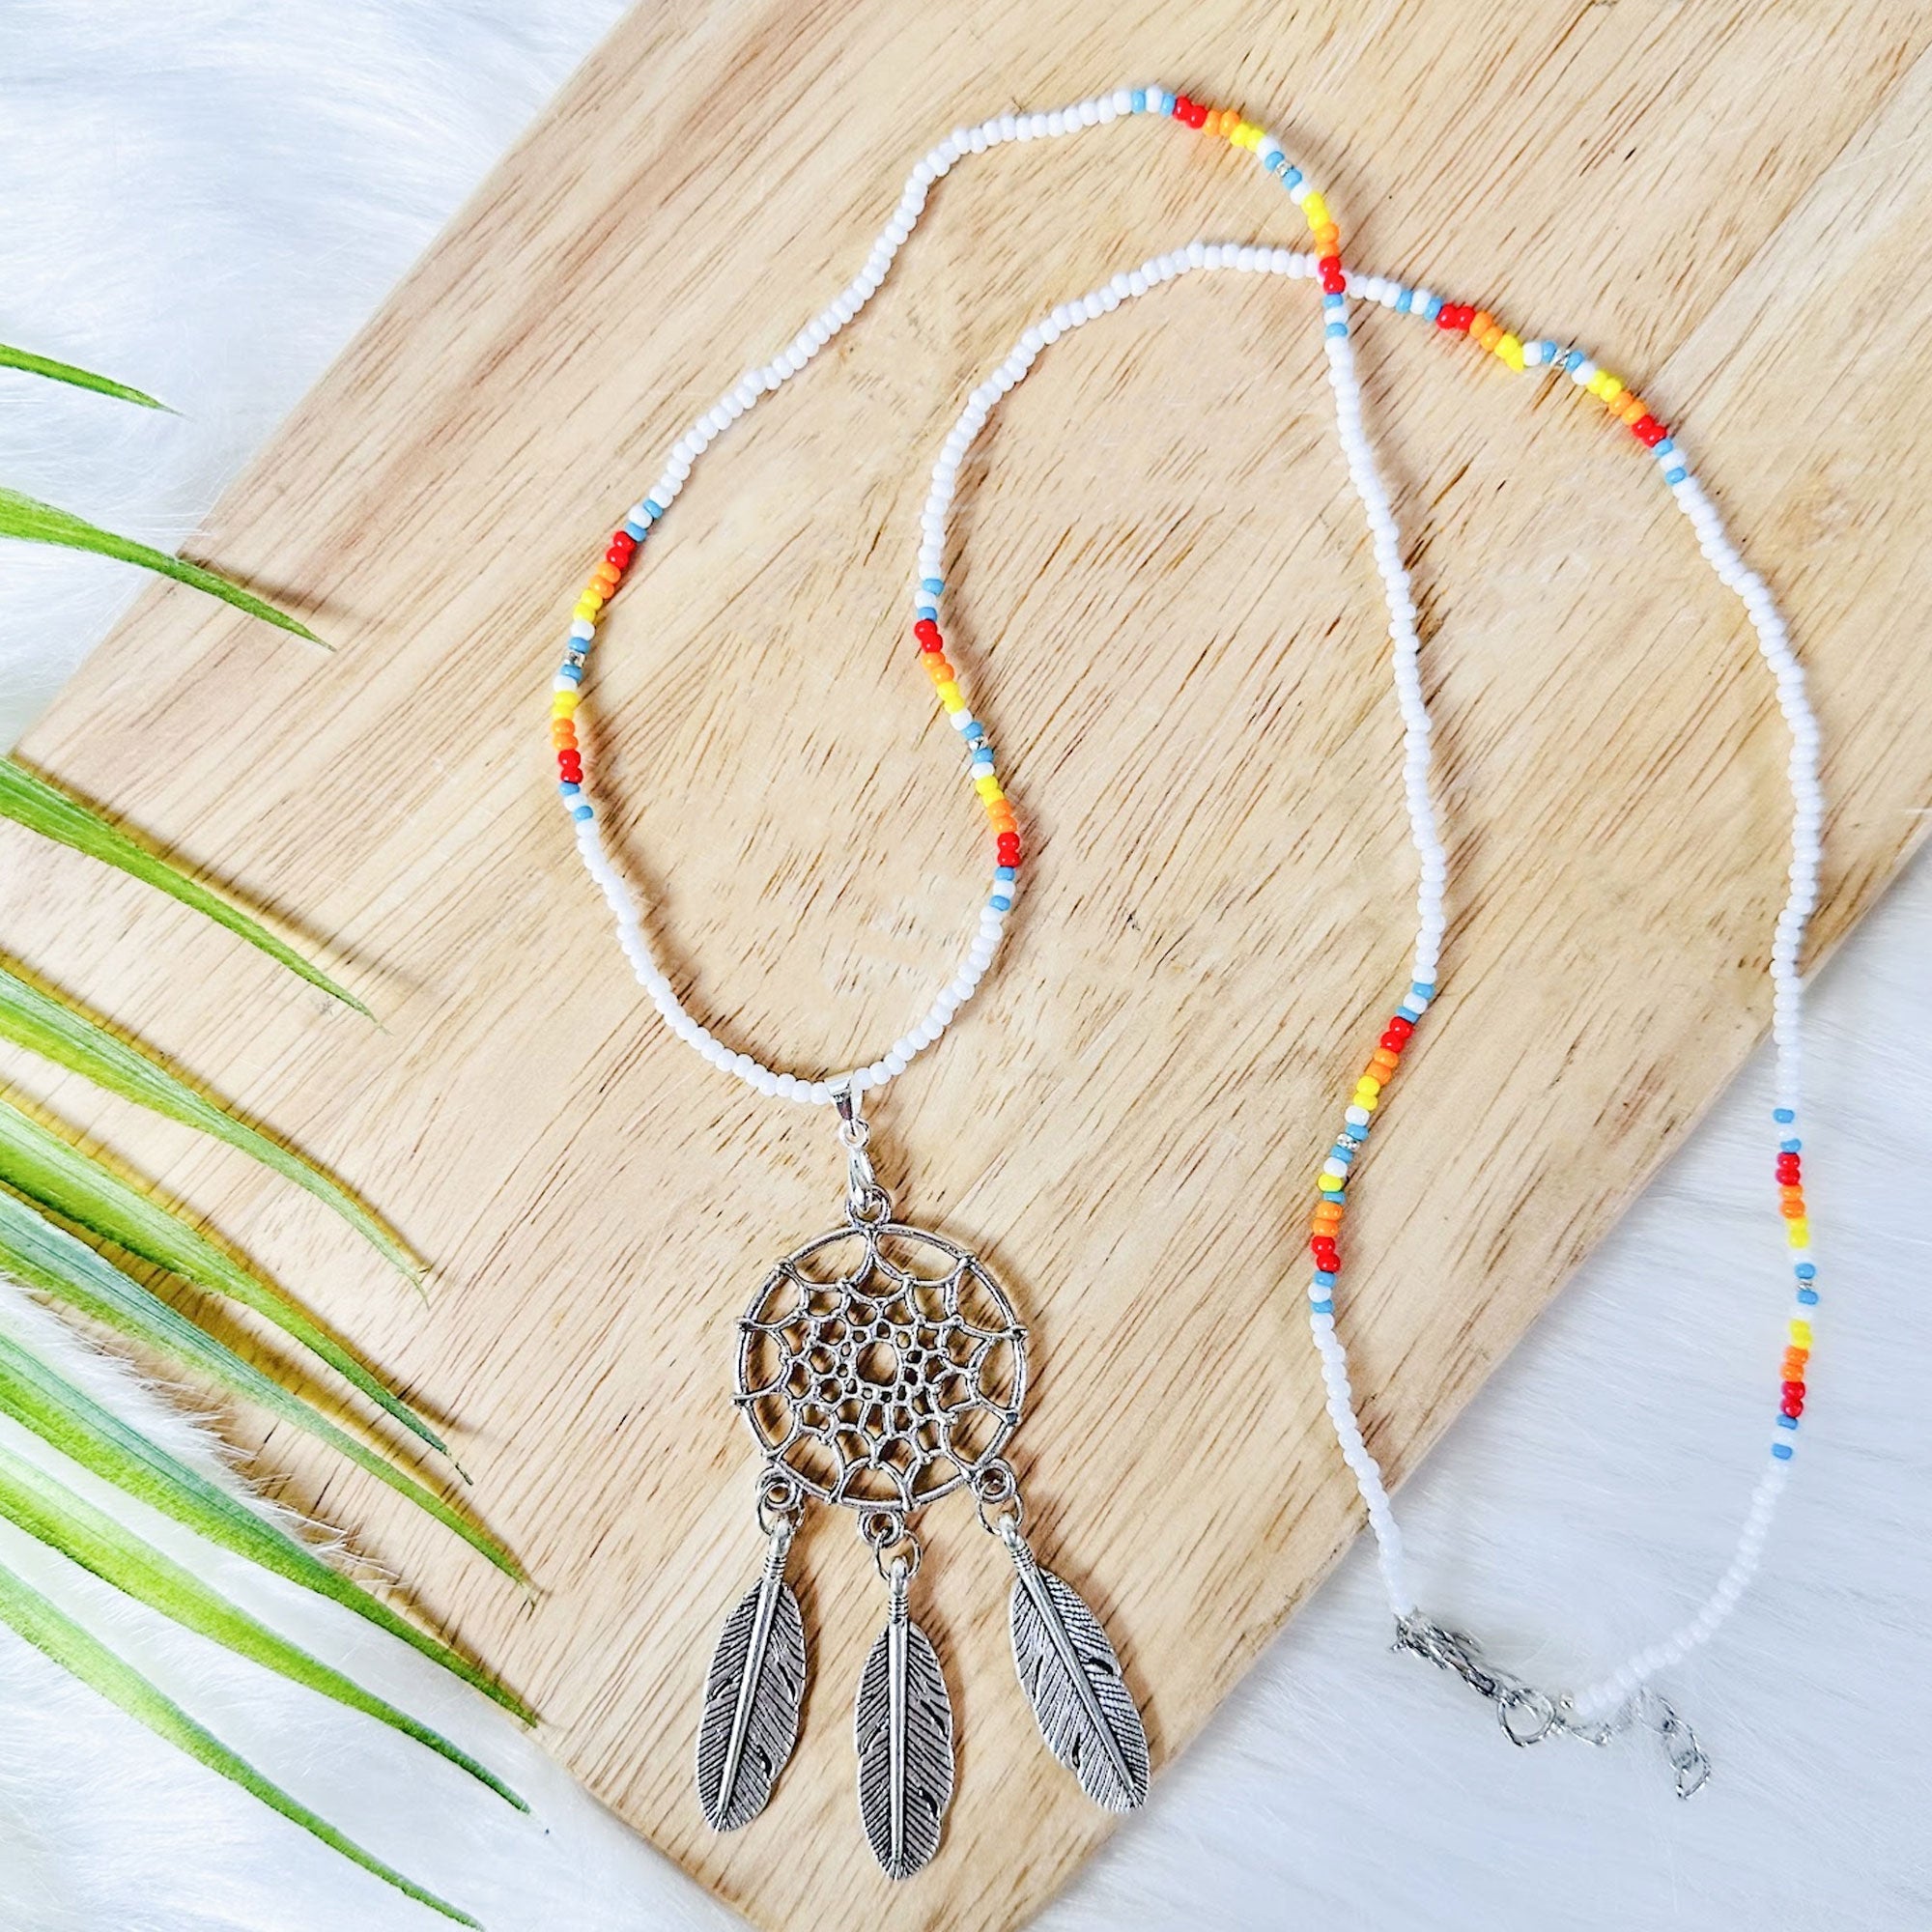 SALE 50% OFF - Long Silver Dreamcatcher White Lightning Handmade Beaded Necklace For Women With Native American Style